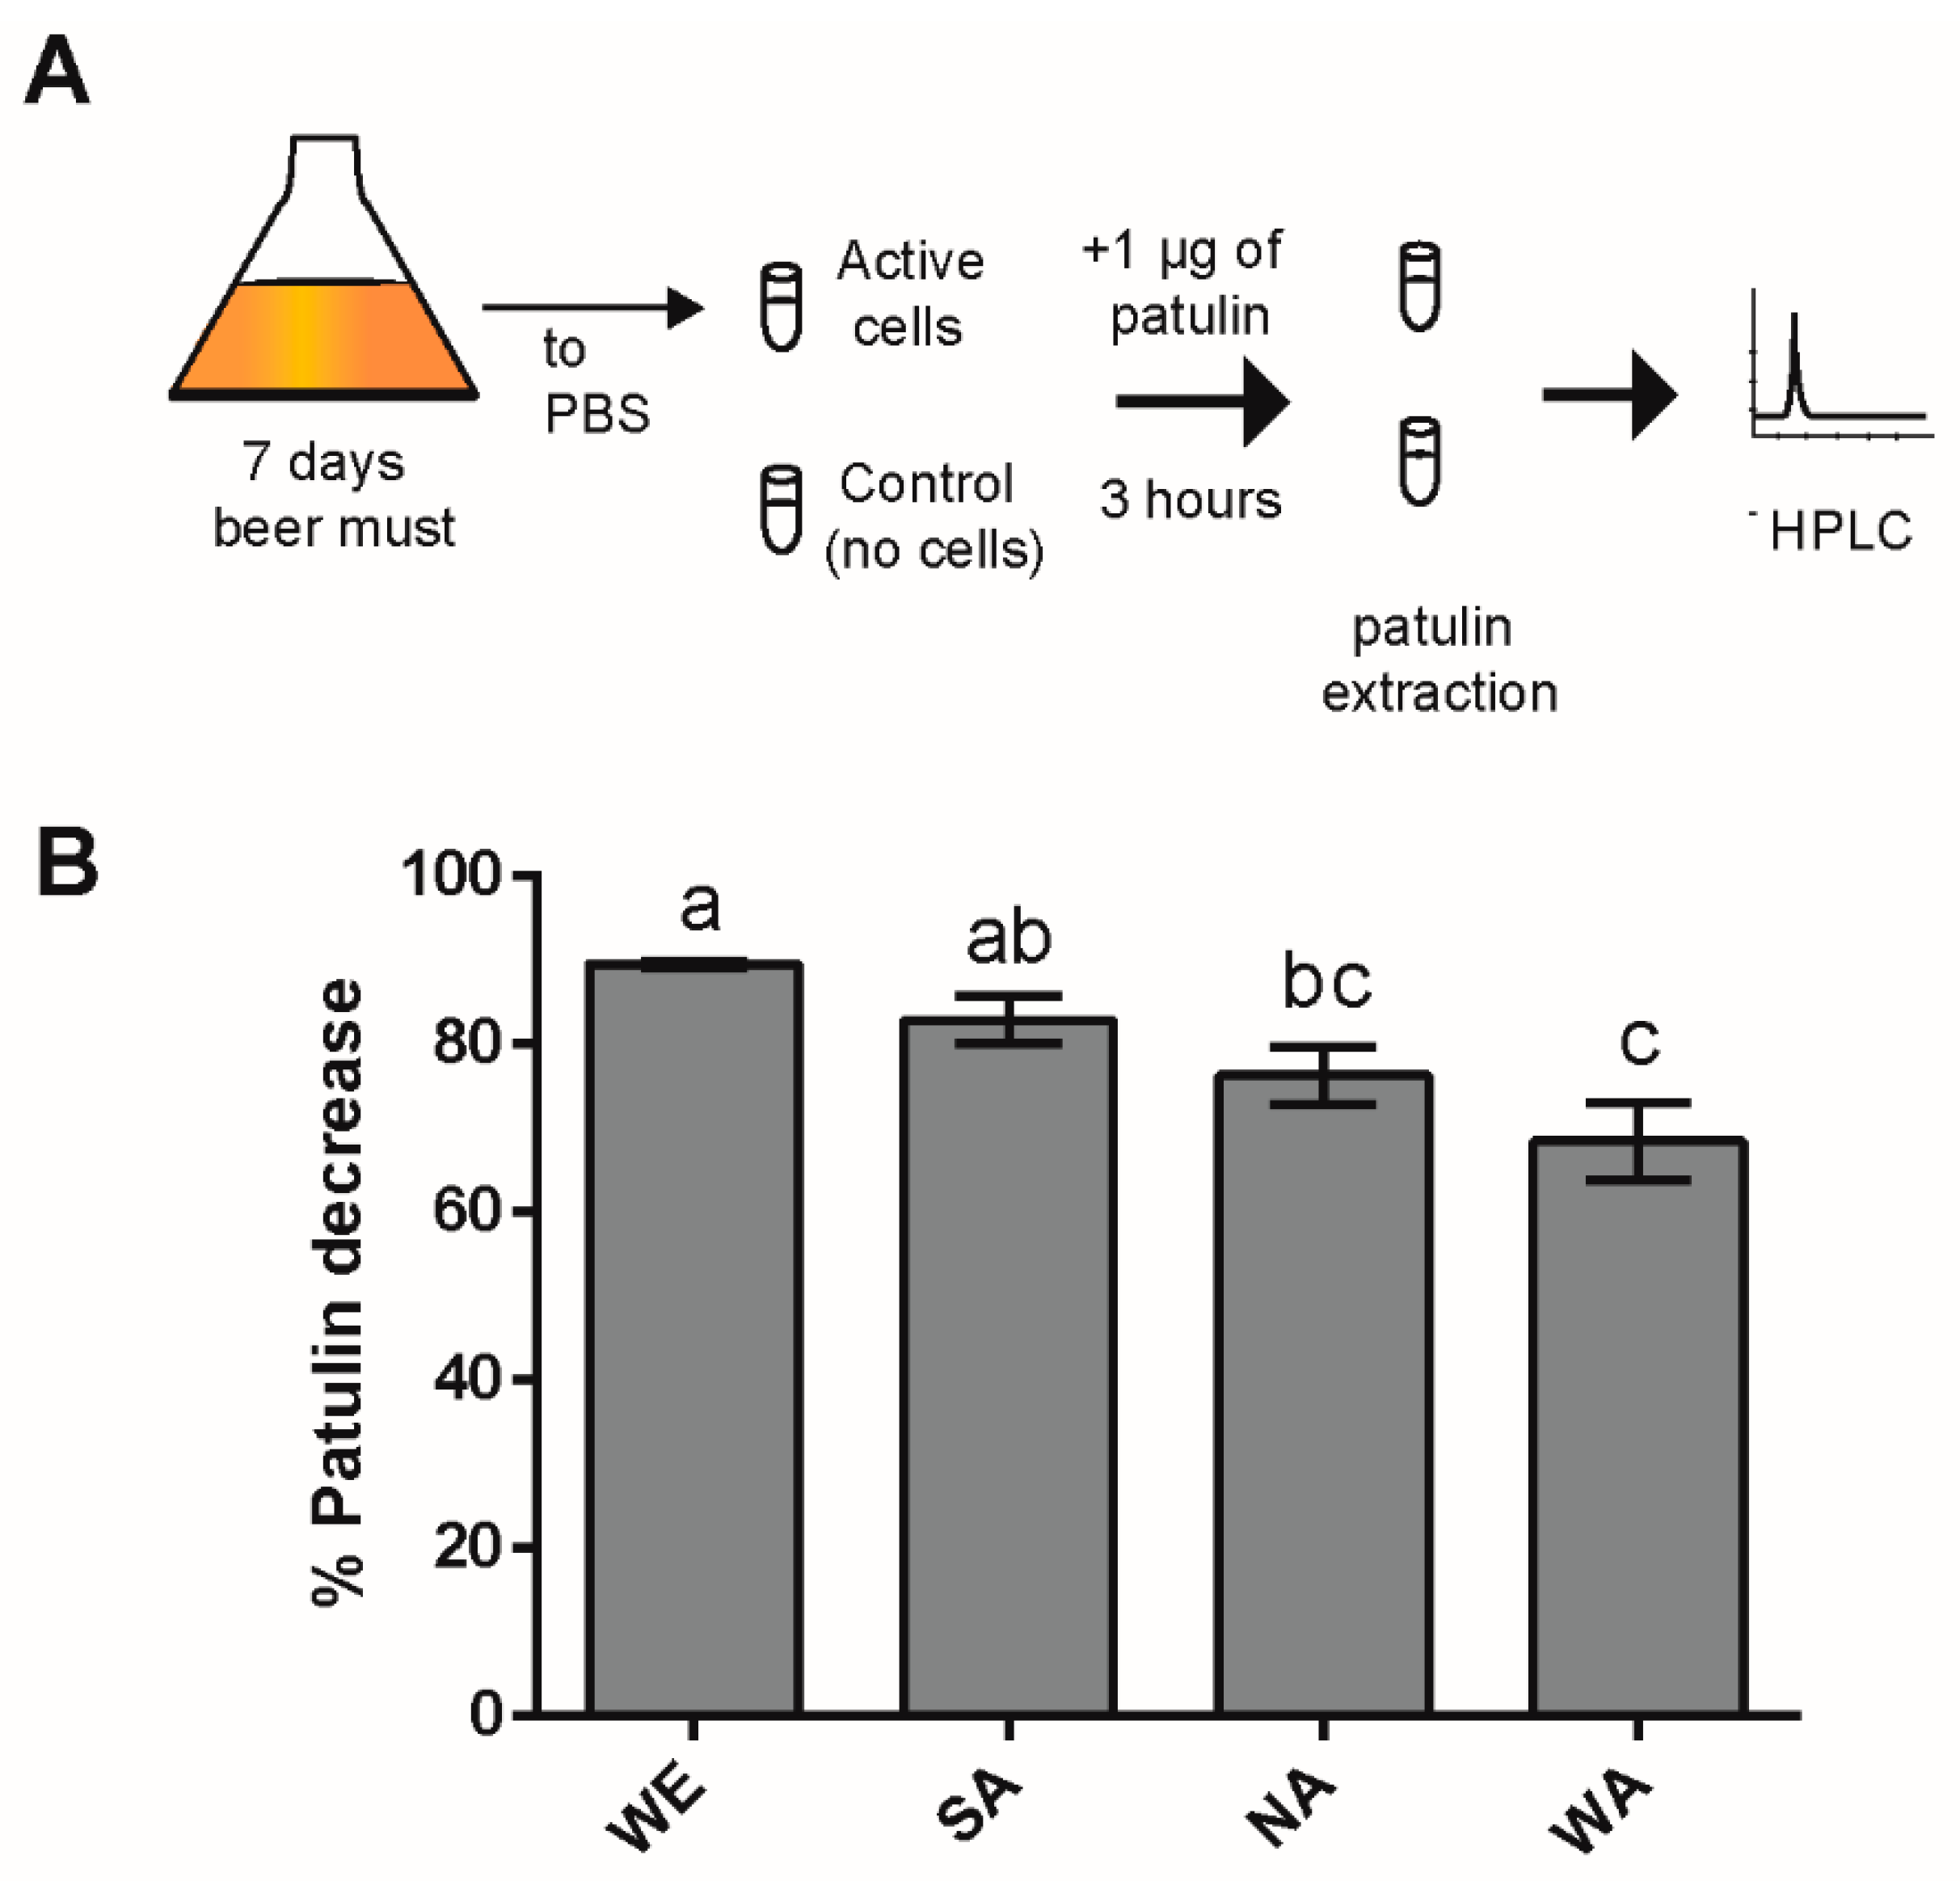 Toxins | in Underlie Free Patulin | cerevisiae Transcriptional Biosorption Distinct Full-Text Toxin to Changes Differences Response in Saccharomyces